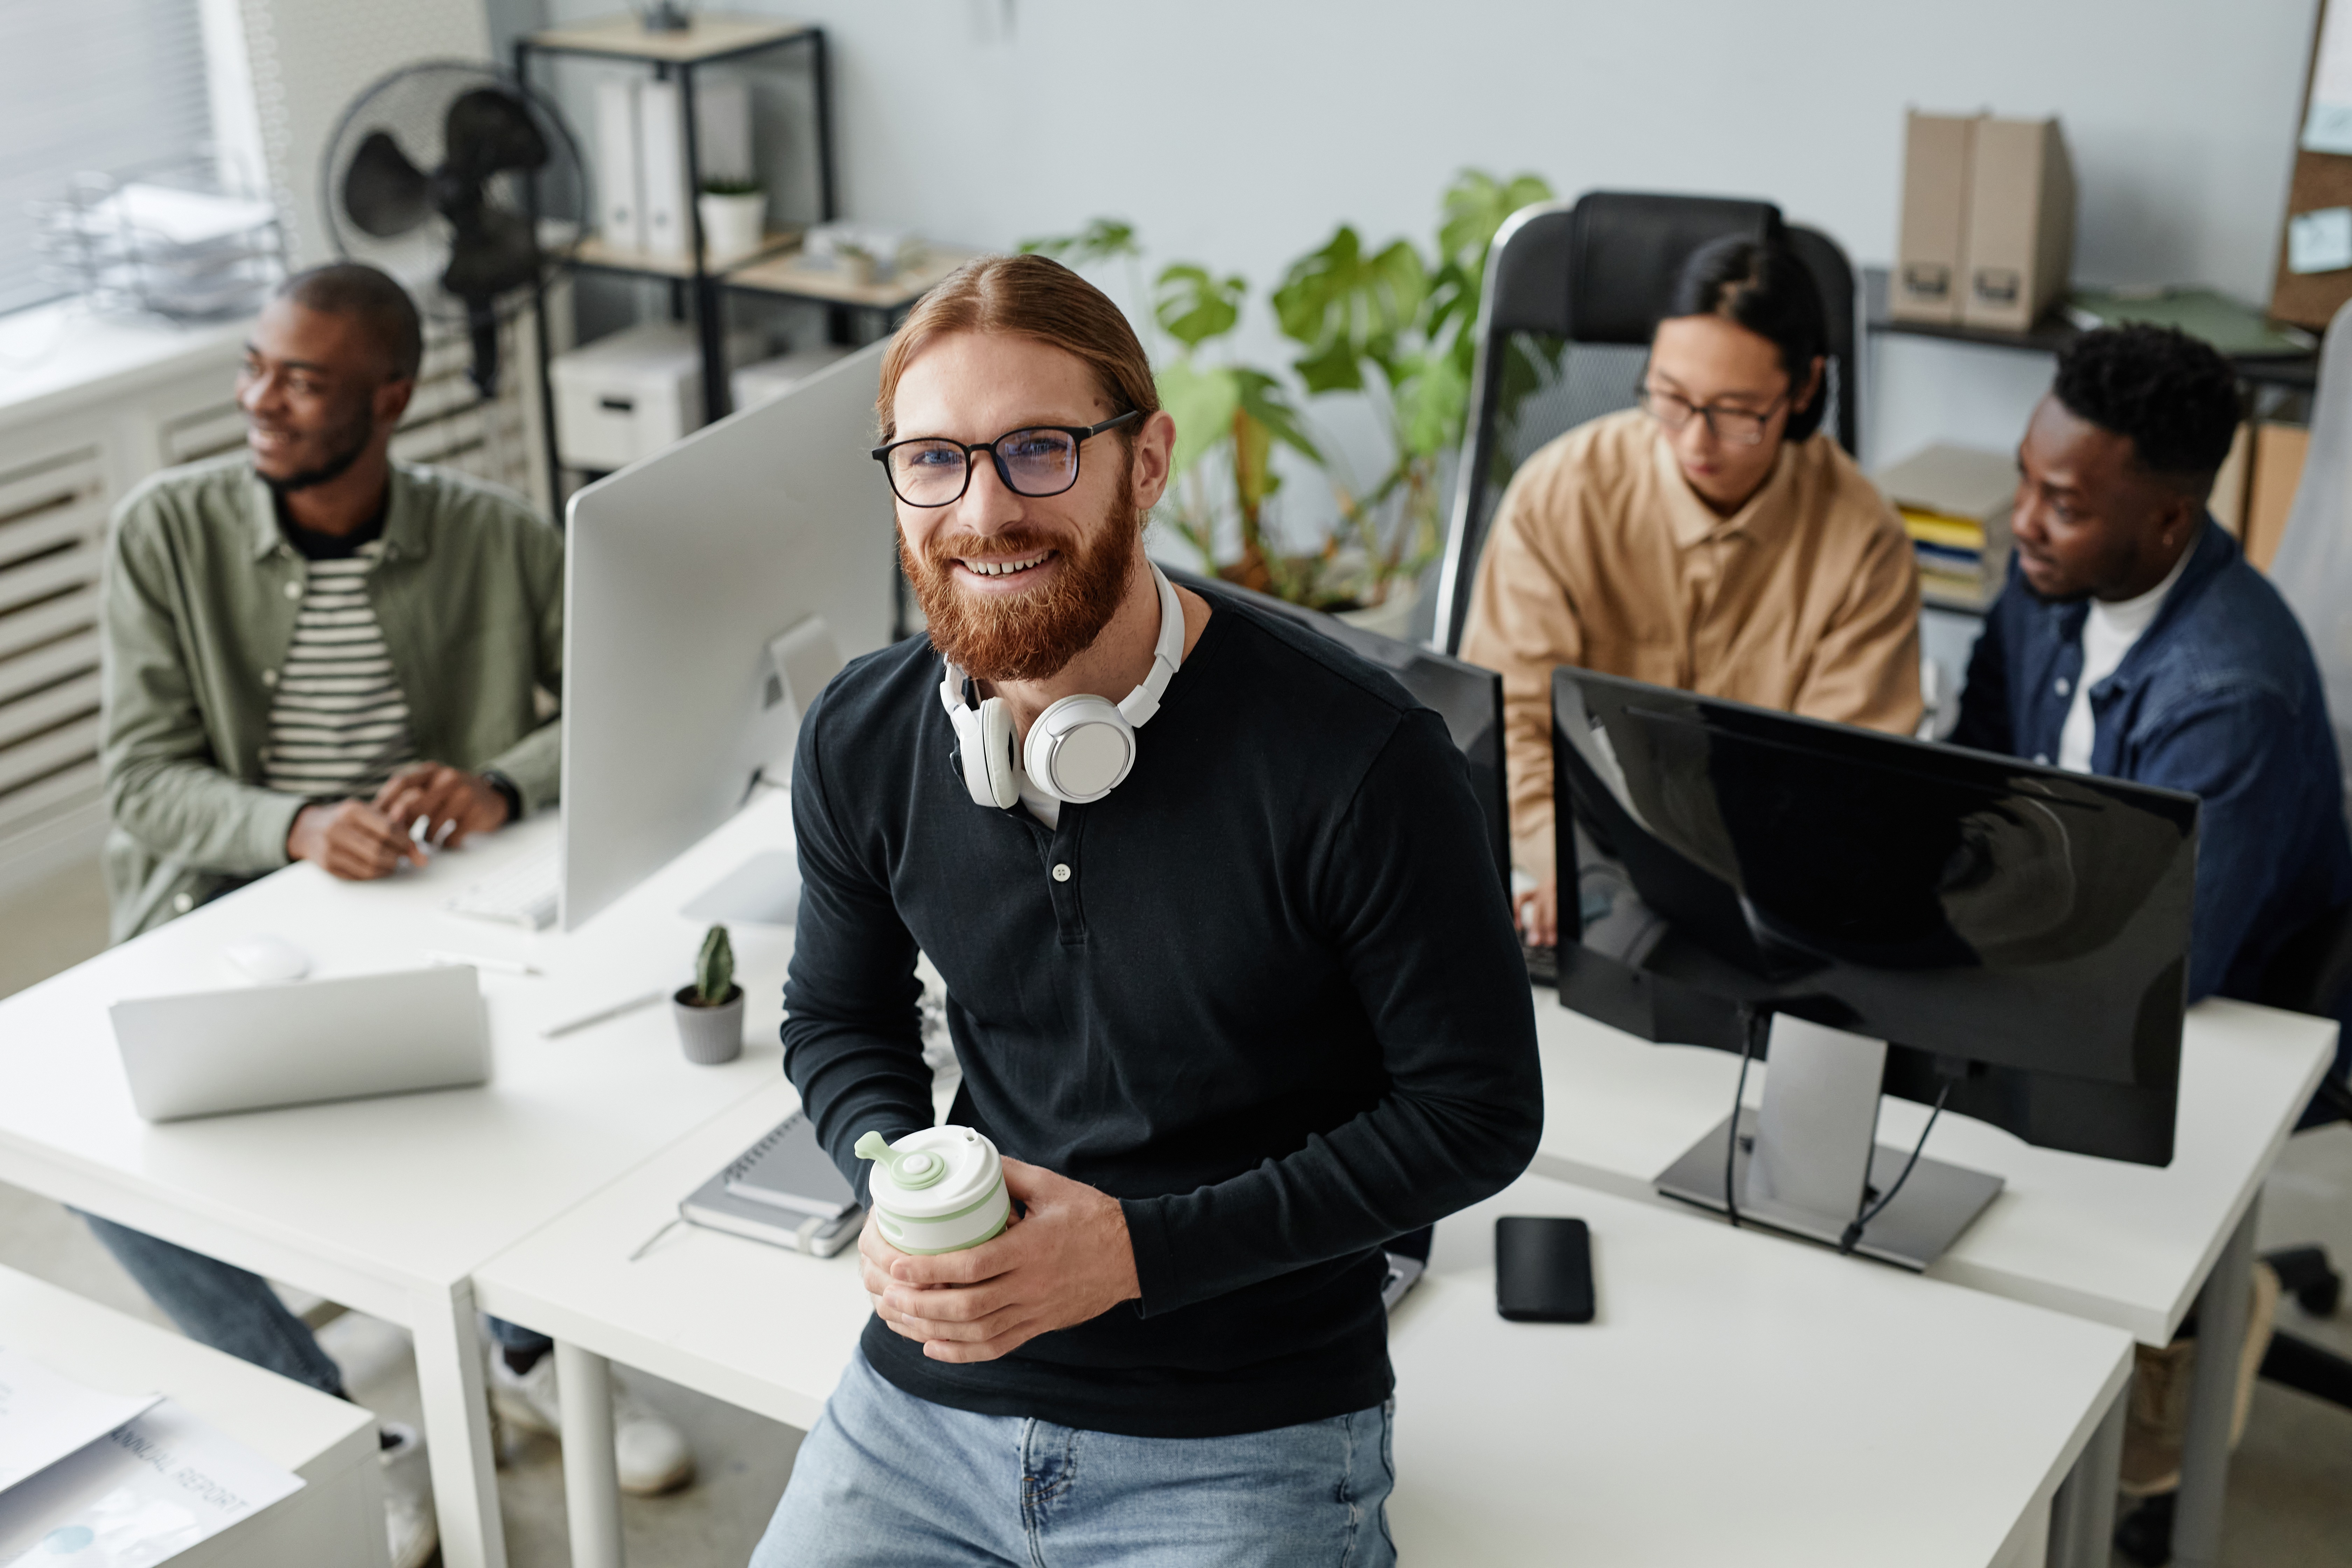 Smiling bearded man in casual attire wearing glasses and headphones stands with coffee in hand. Behind him is a coworking desk with three diverse men collaborating at desktop computers